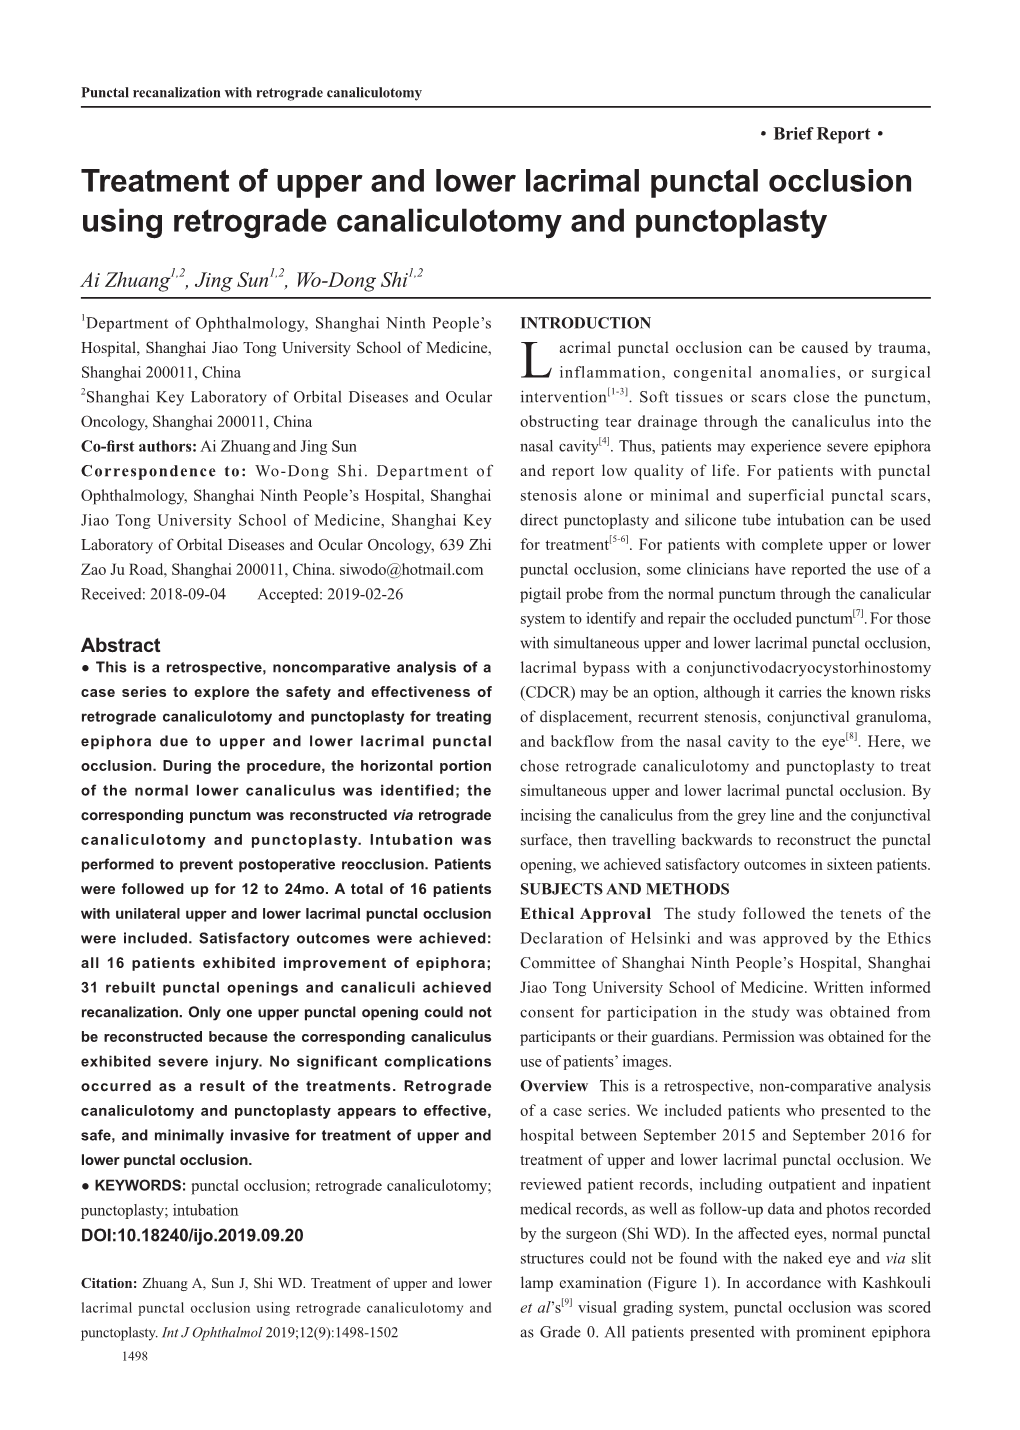 Treatment of Upper and Lower Lacrimal Punctal Occlusion Using Retrograde Canaliculotomy and Punctoplasty